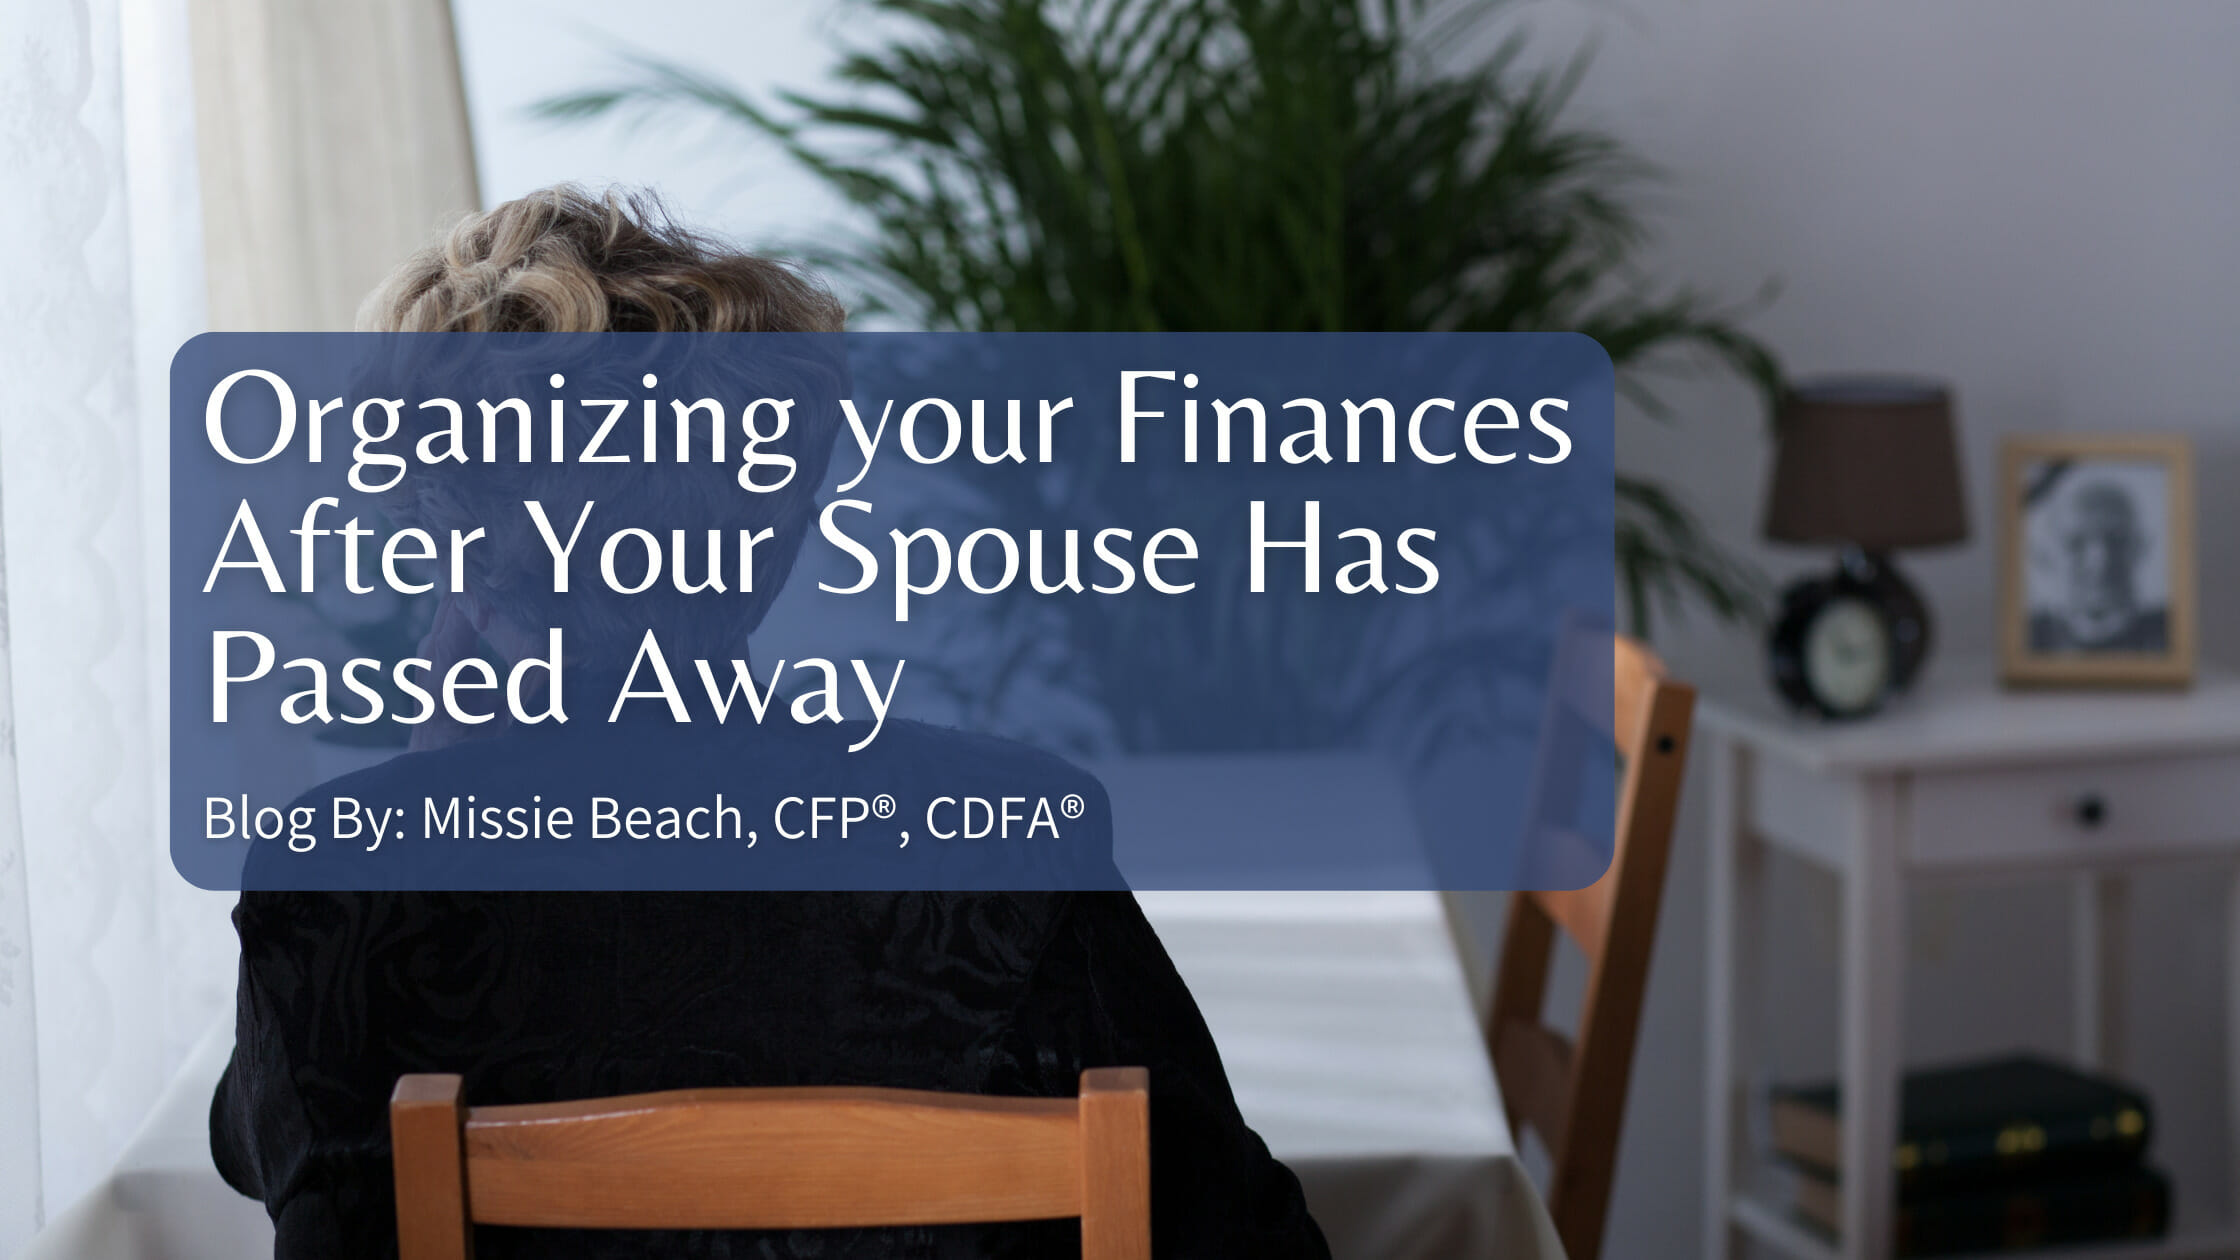 Organizing your Finances After Your Spouse Has Passed Away